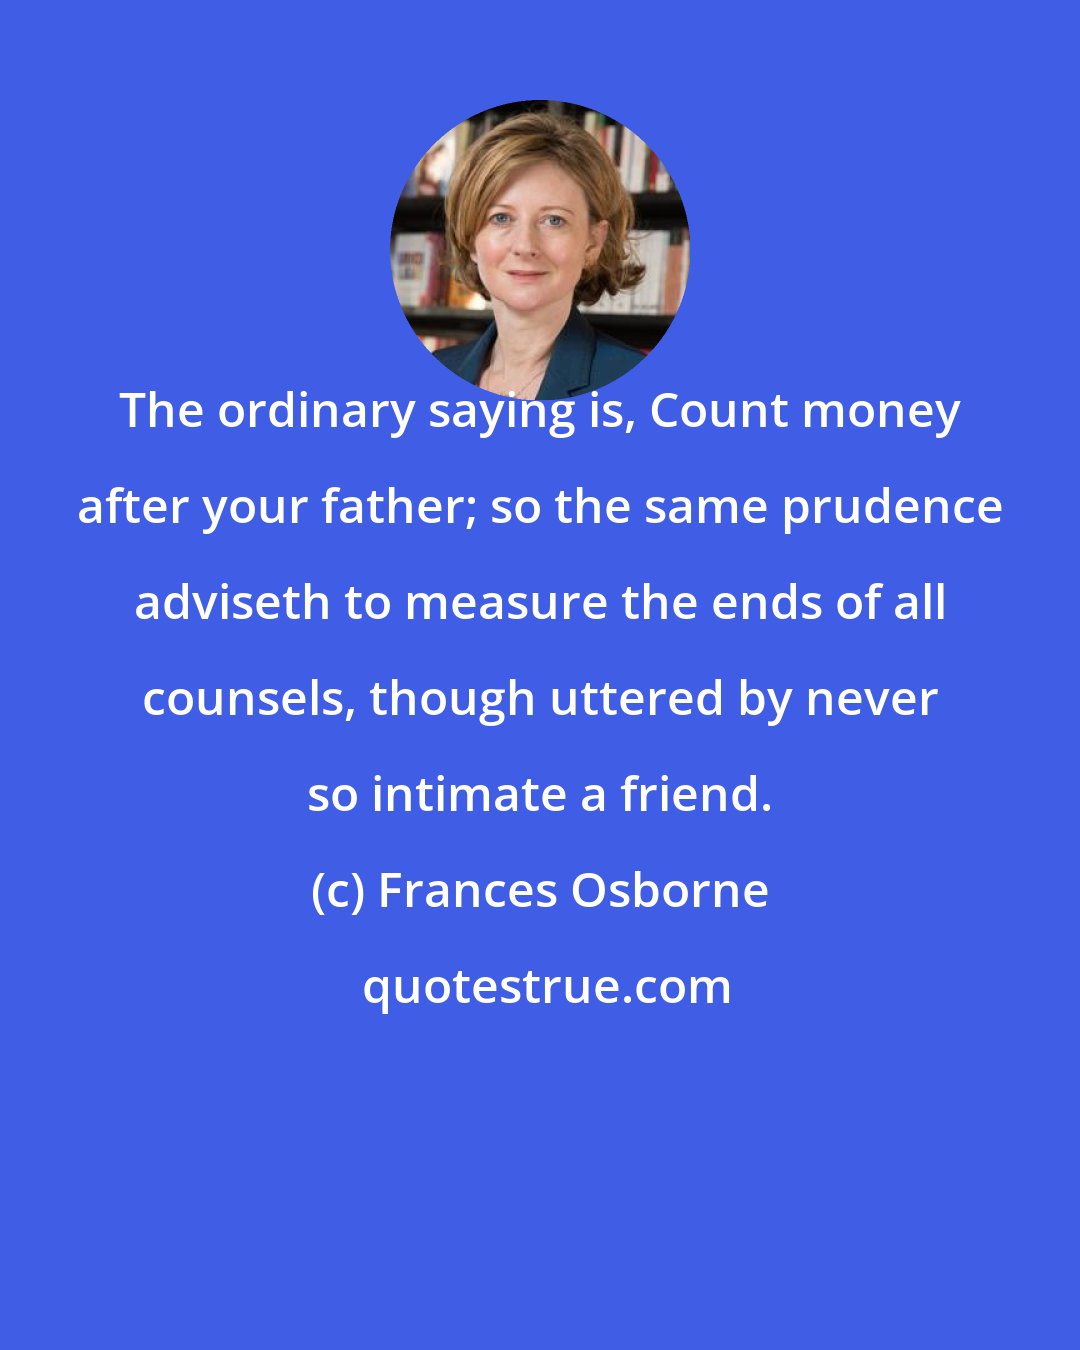 Frances Osborne: The ordinary saying is, Count money after your father; so the same prudence adviseth to measure the ends of all counsels, though uttered by never so intimate a friend.